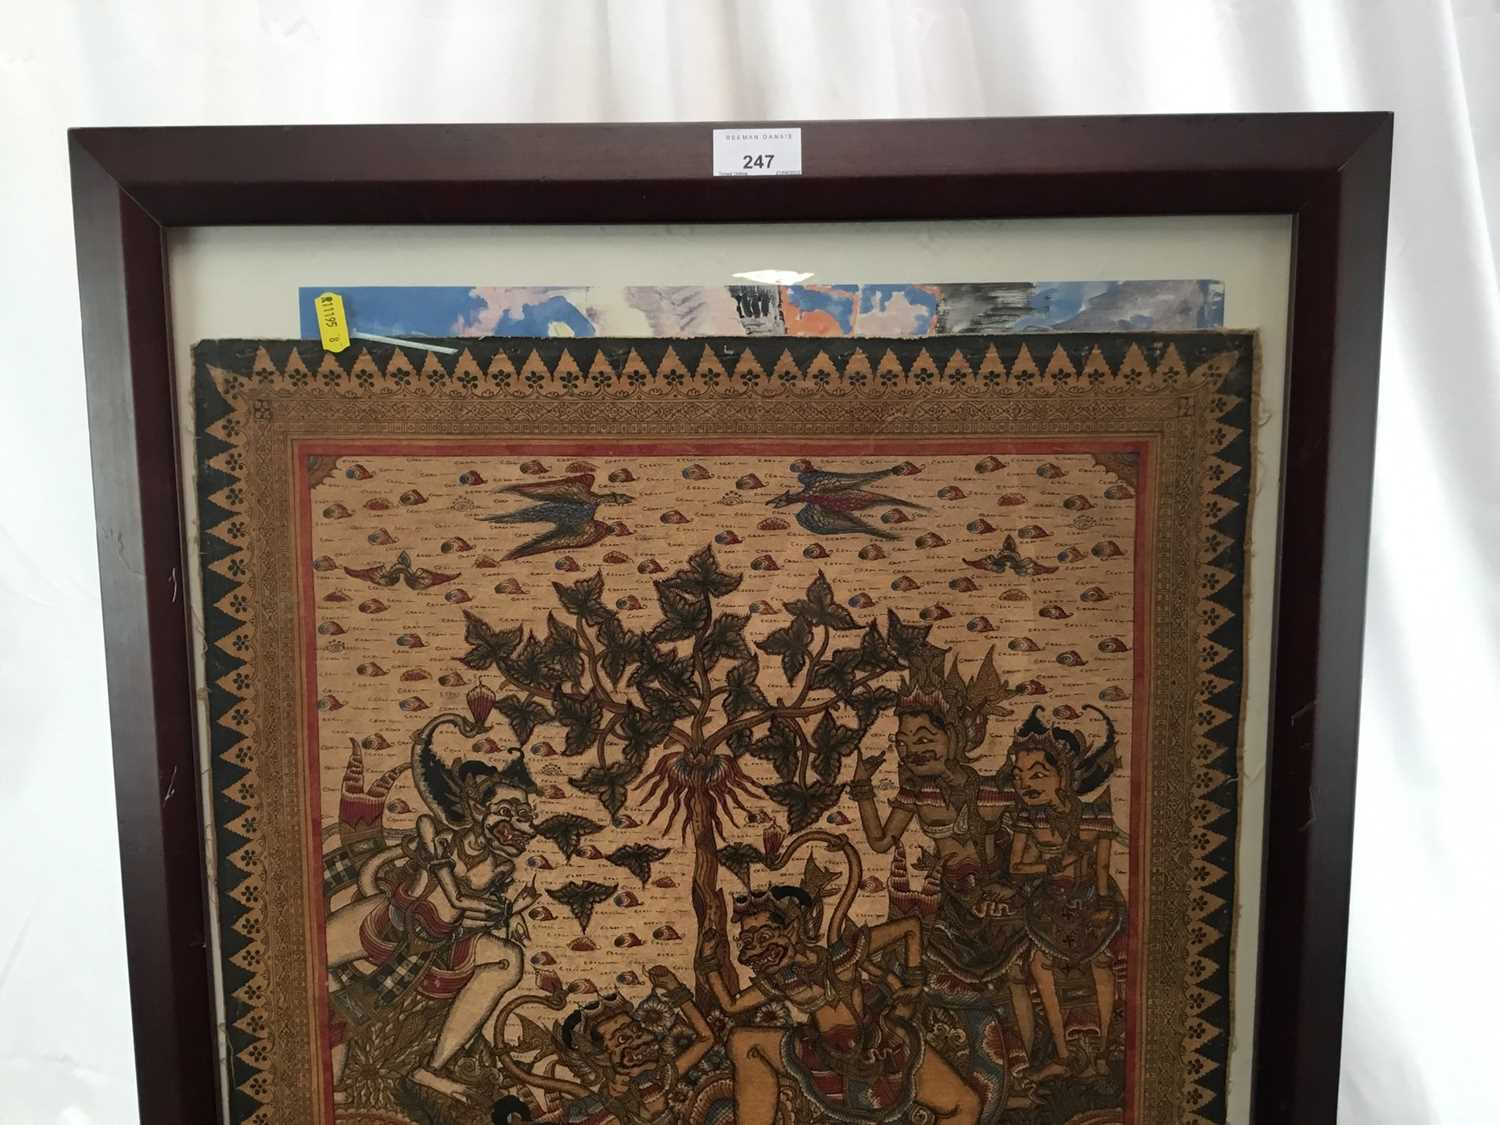 Balinese painting on cloth - 47cm x 63cm in temporary frame - Image 4 of 5